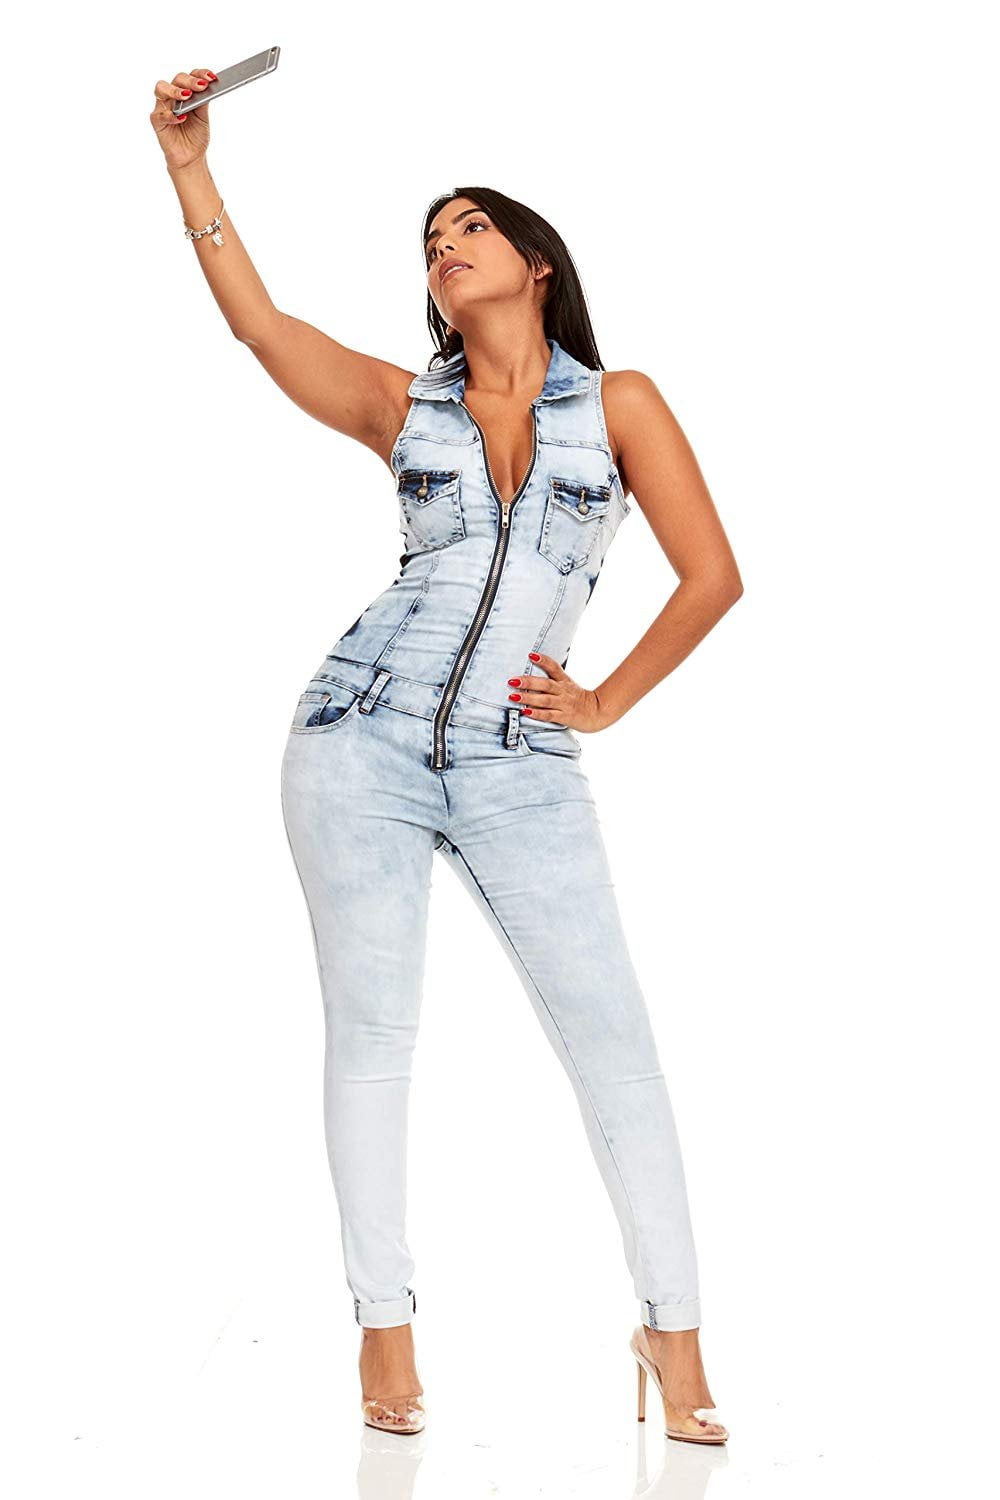 9X-SPEED Jeans Womens， Pocket Patched Denim Overall Jumpsuit